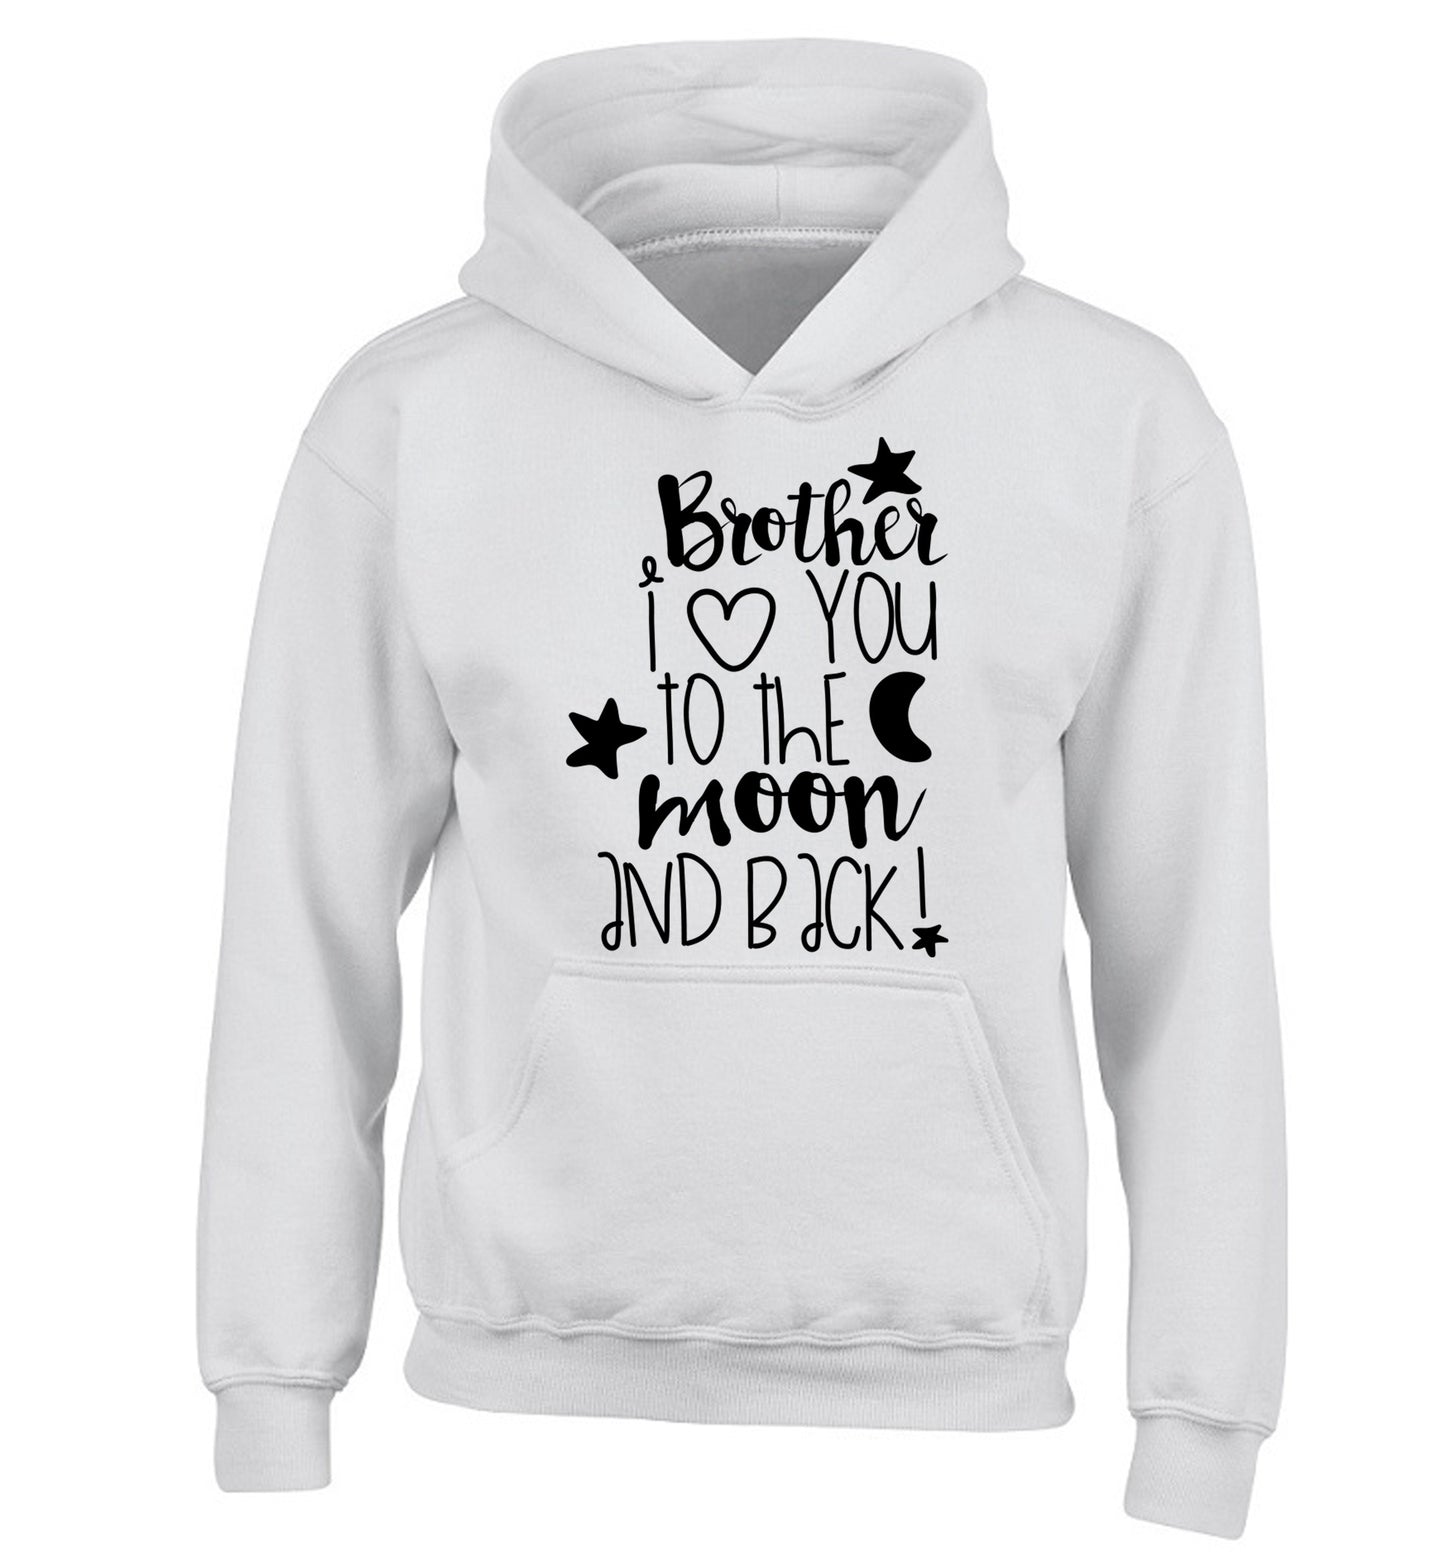 Brother I love you to the moon and back children's white hoodie 12-14 Years